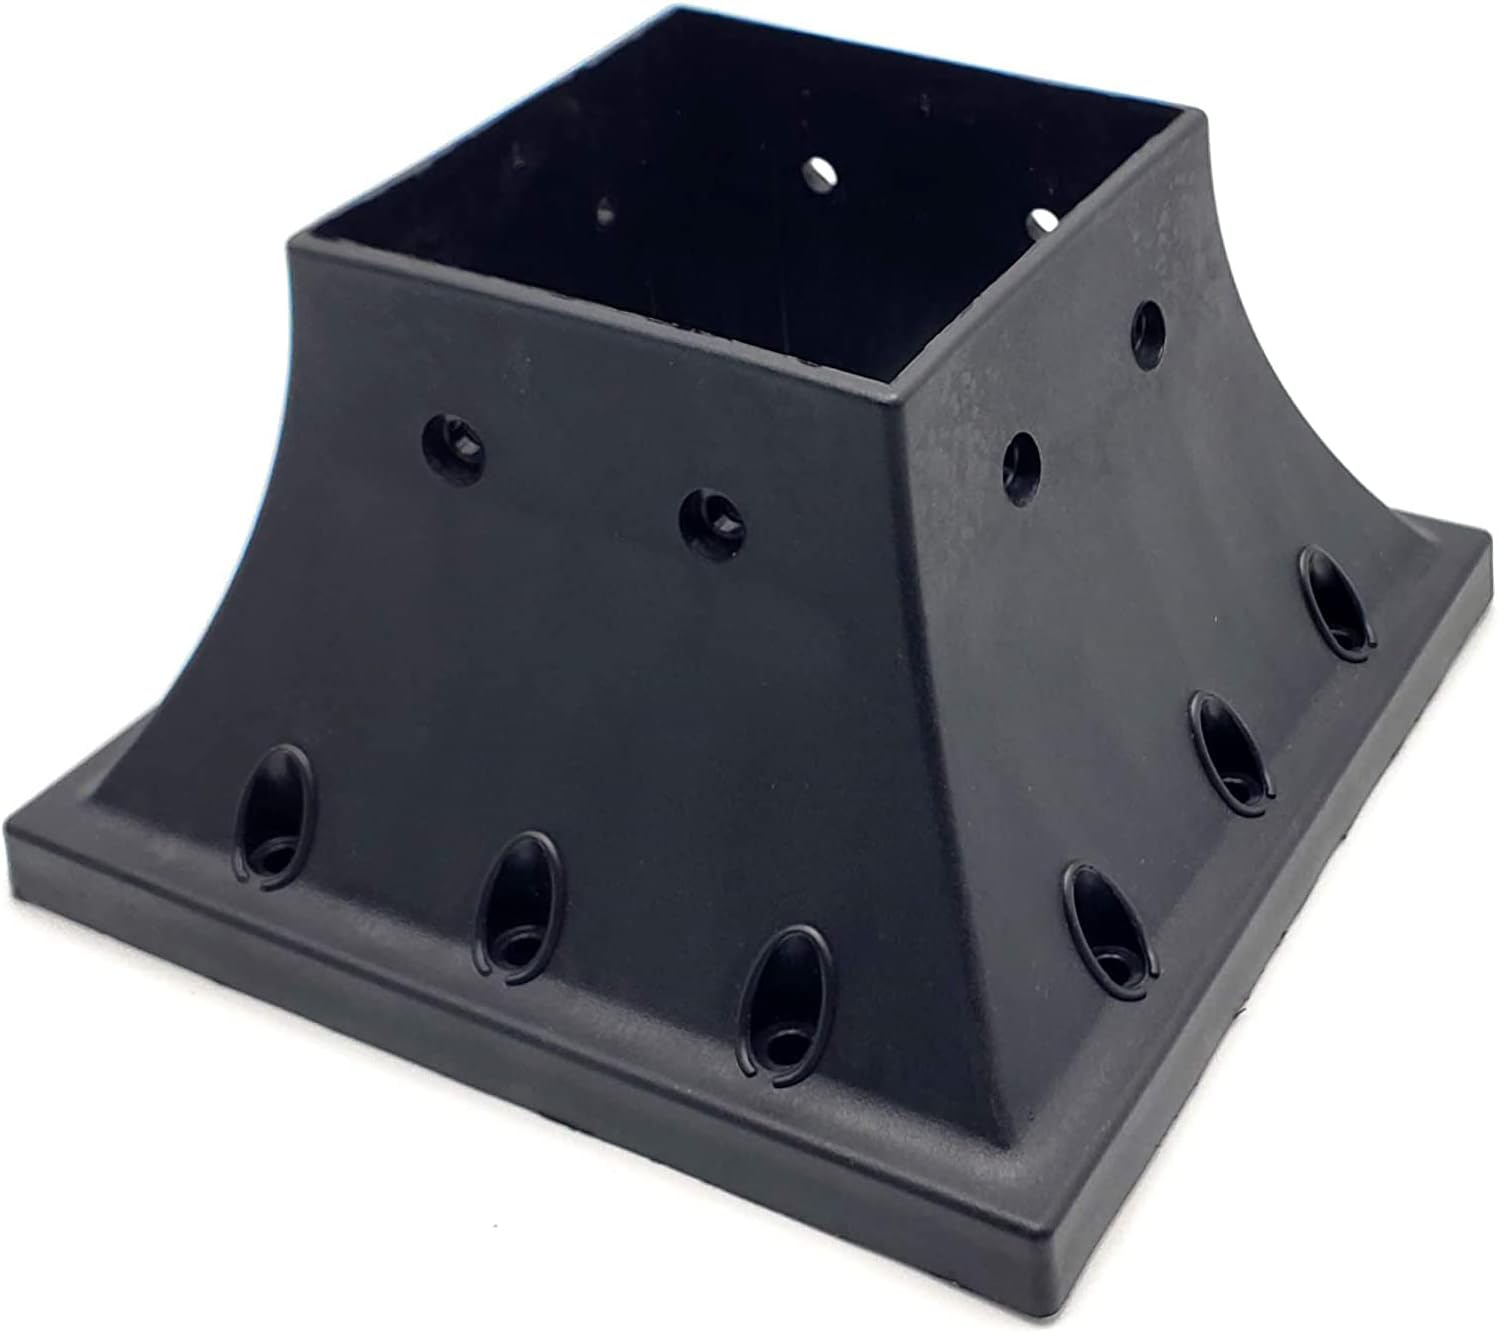 Wizard Industries 4x4 Post Support Pro Version Table Leg Bracket (Actual Size 3.5"x3.5") Post and Screws NOT Included!